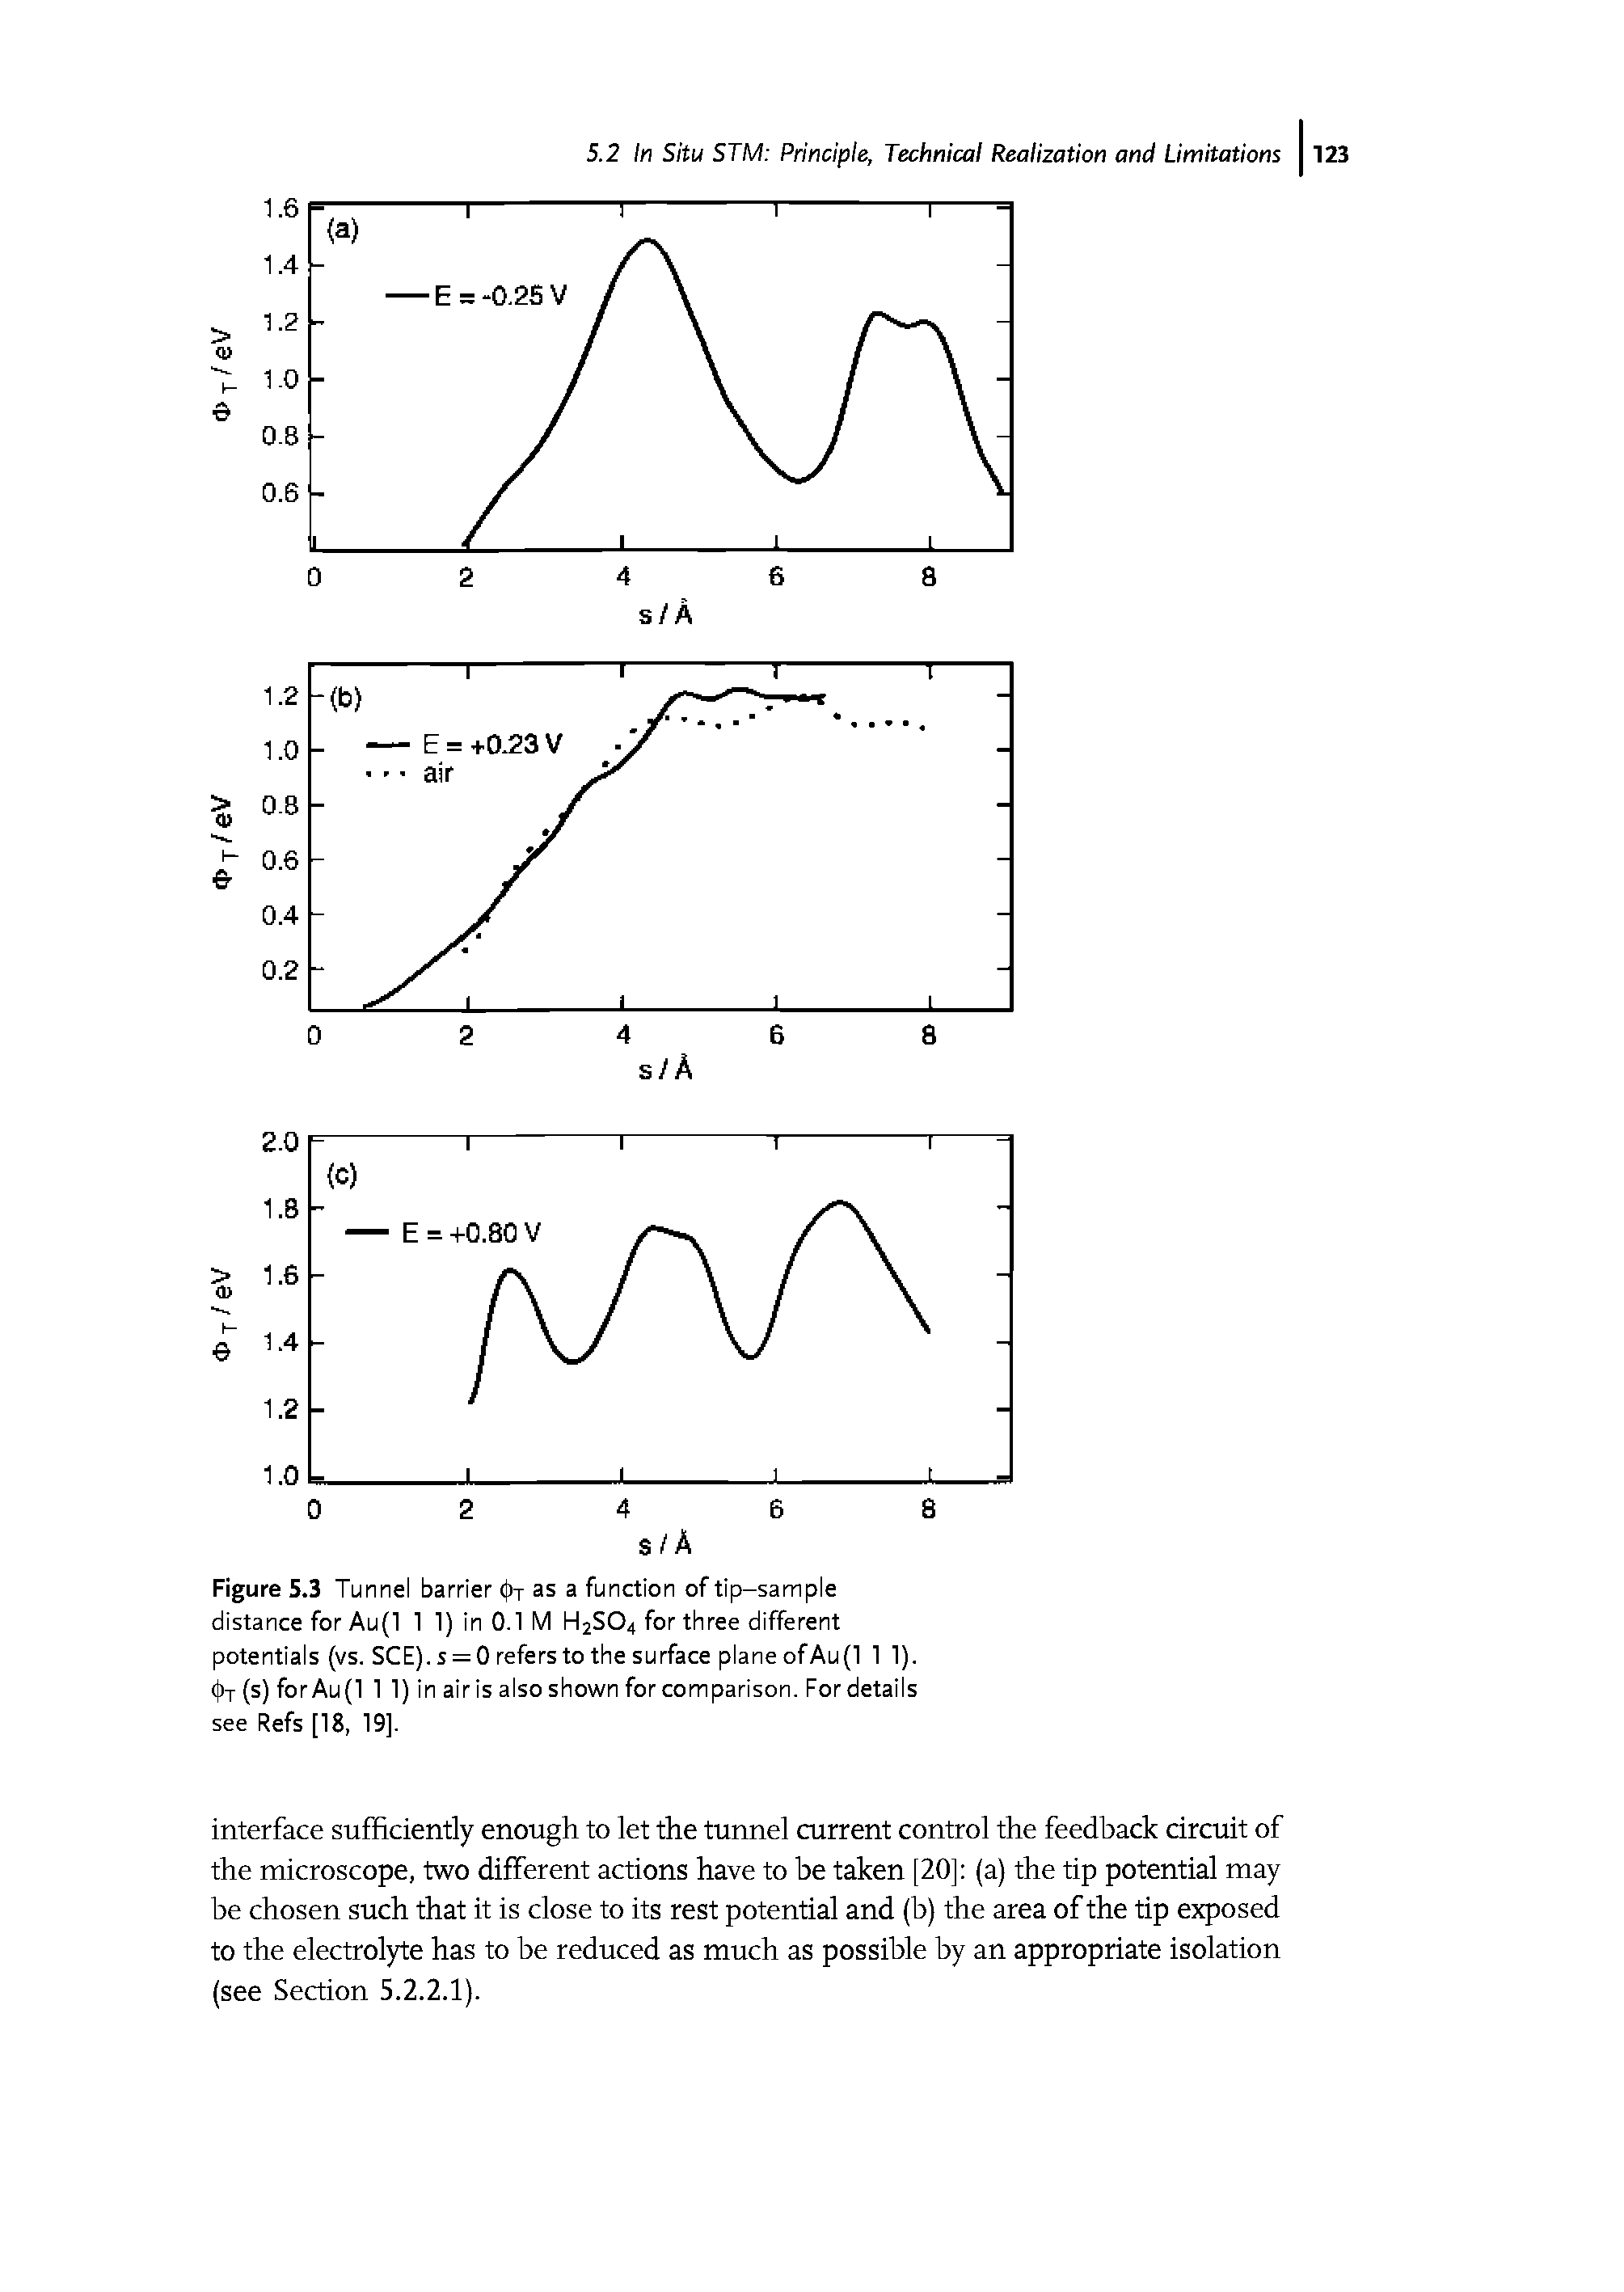 Figure 5.3 Tunnel barrier pT as a function of tip-sample distance for Au(l 1 1) in 0.1 M H2S04 for three different potentials (vs. SCE). s = 0 refers to the surface plane ofAu(l 1 1). pT (s) for Au(l 1 1) in air is also shown for comparison. For details see Refs [18, 19].